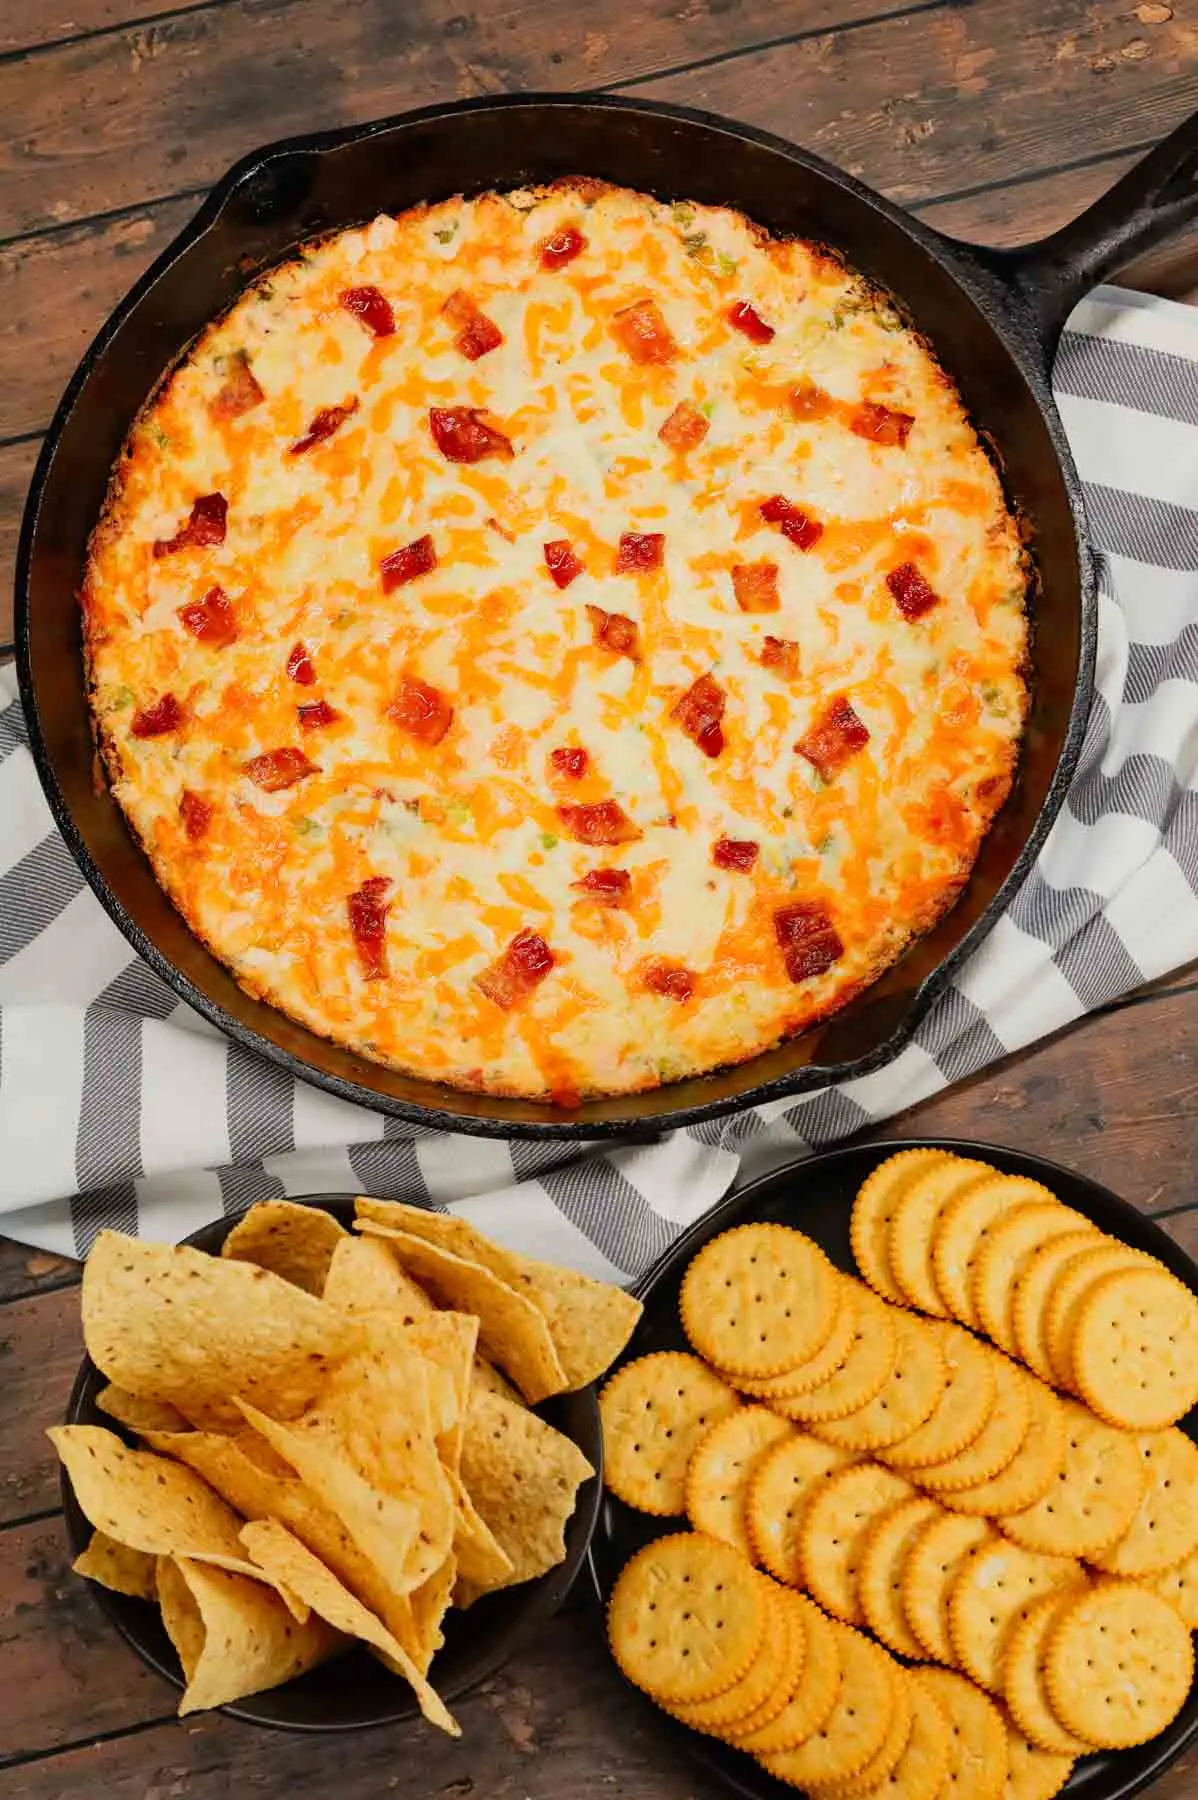 Crack Chicken Dip is a delicious baked dip loaded with shredded chicken, cream cheese, ranch dressing, bacon, green onions and cheddar cheese.